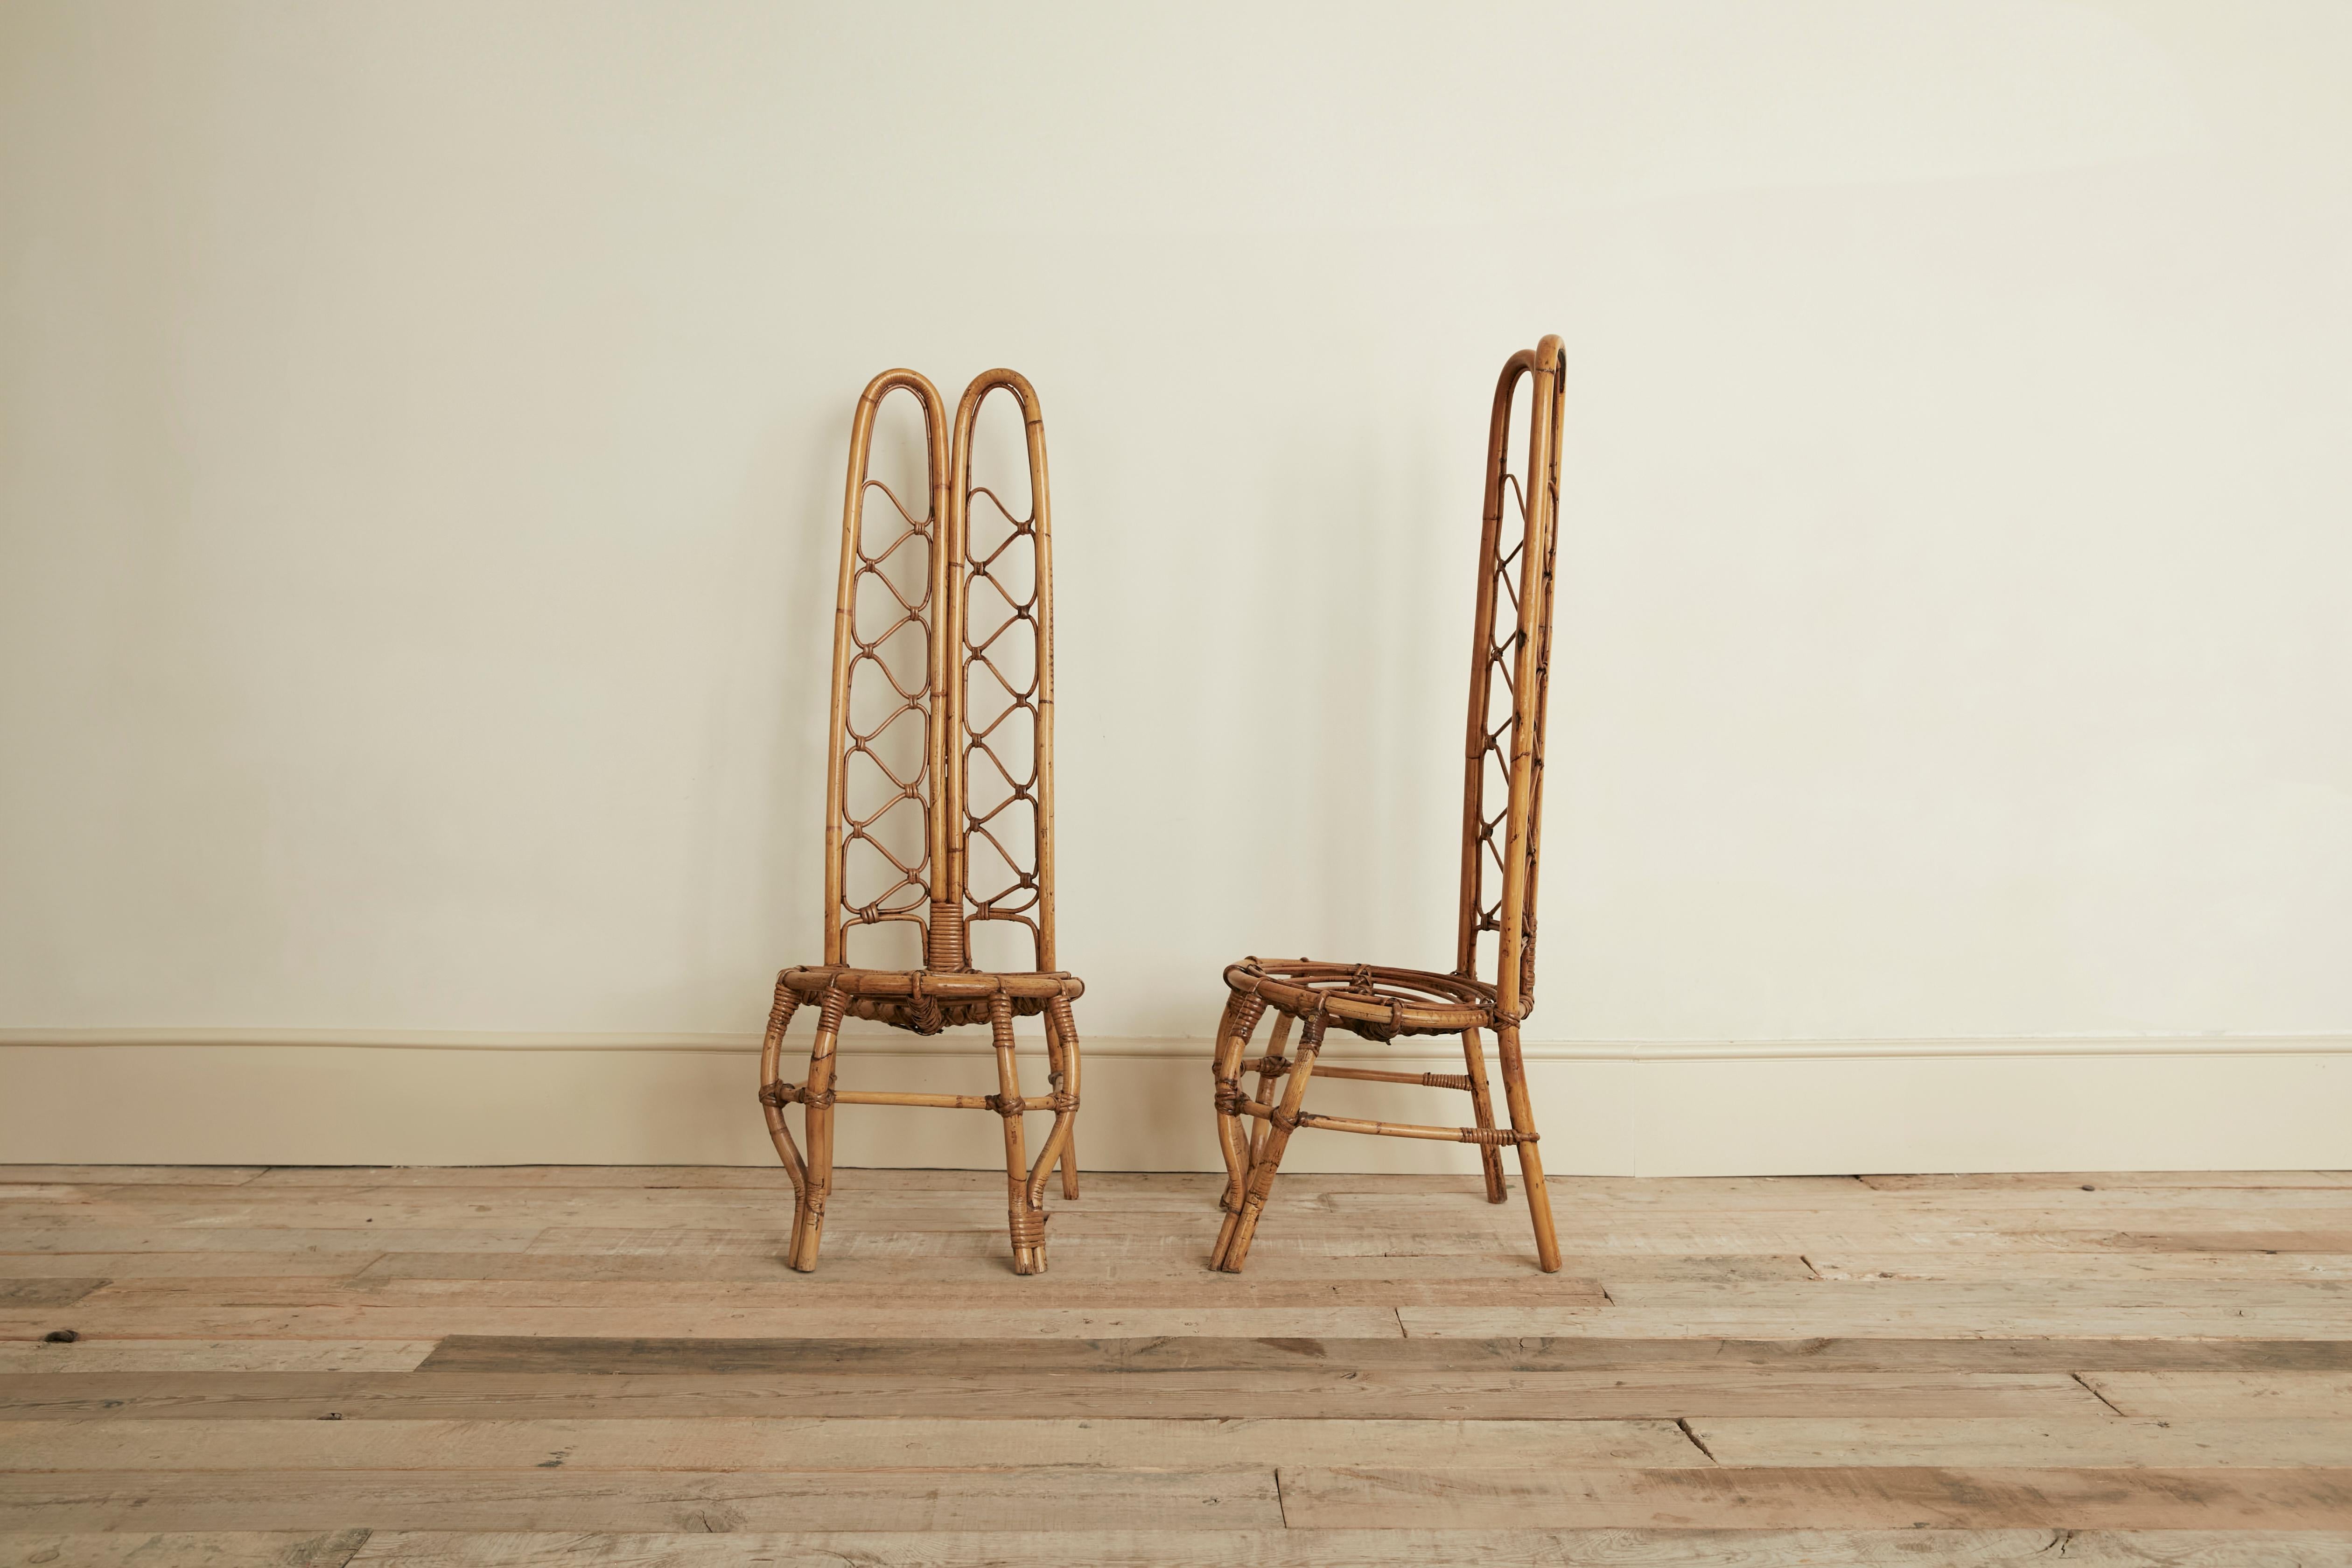 
Pair of bamboo chairs following the designs of Dirk Van SLiedrecht for Rohe Noordwolde, with double arched backs and rounded seats in bamboo and rattan. France